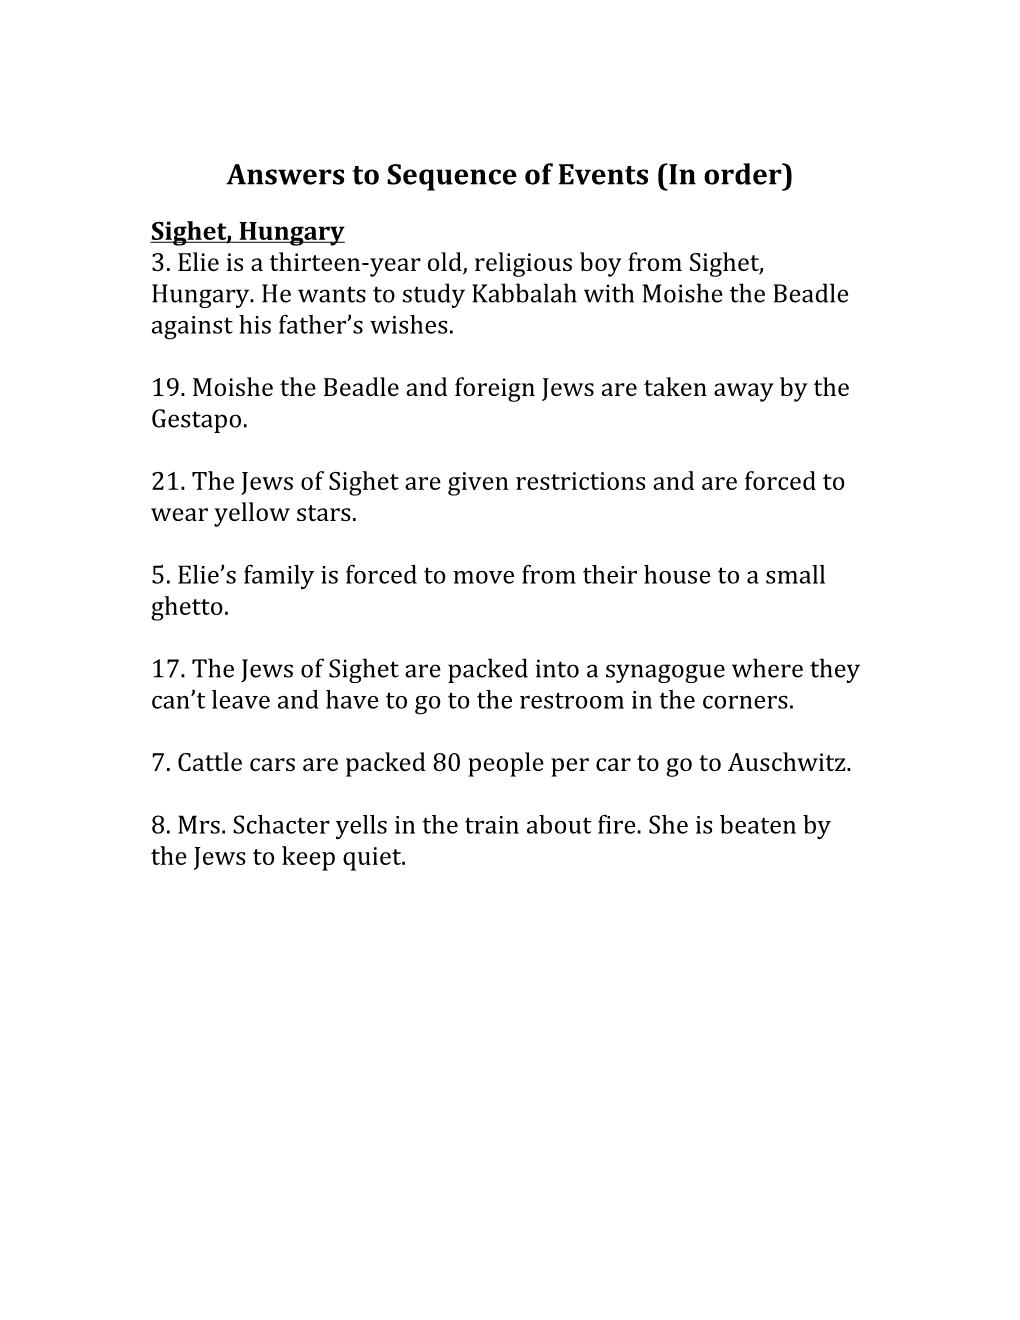 Answers to Sequence of Events (In Order)